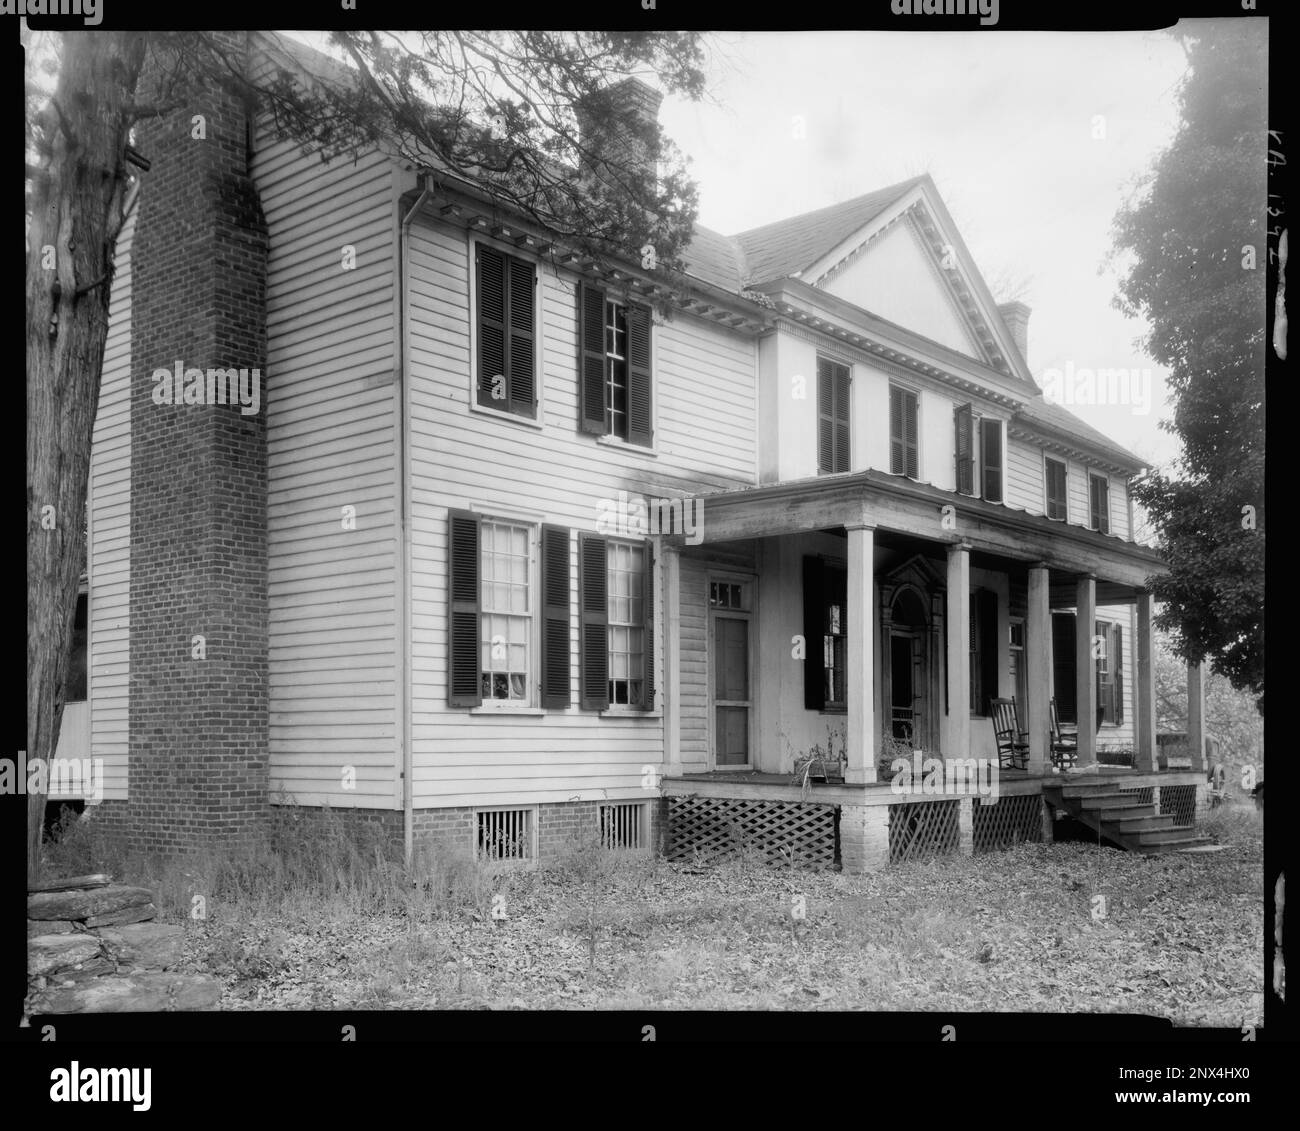 Welbourne, Lynchburg vic., Bedford County, Virginia. Carnegie Survey of the Architecture of the South. Stati Uniti Virginia Bedford County Lynchburg vic, Porches, Houses, Clapboard siding. Foto Stock